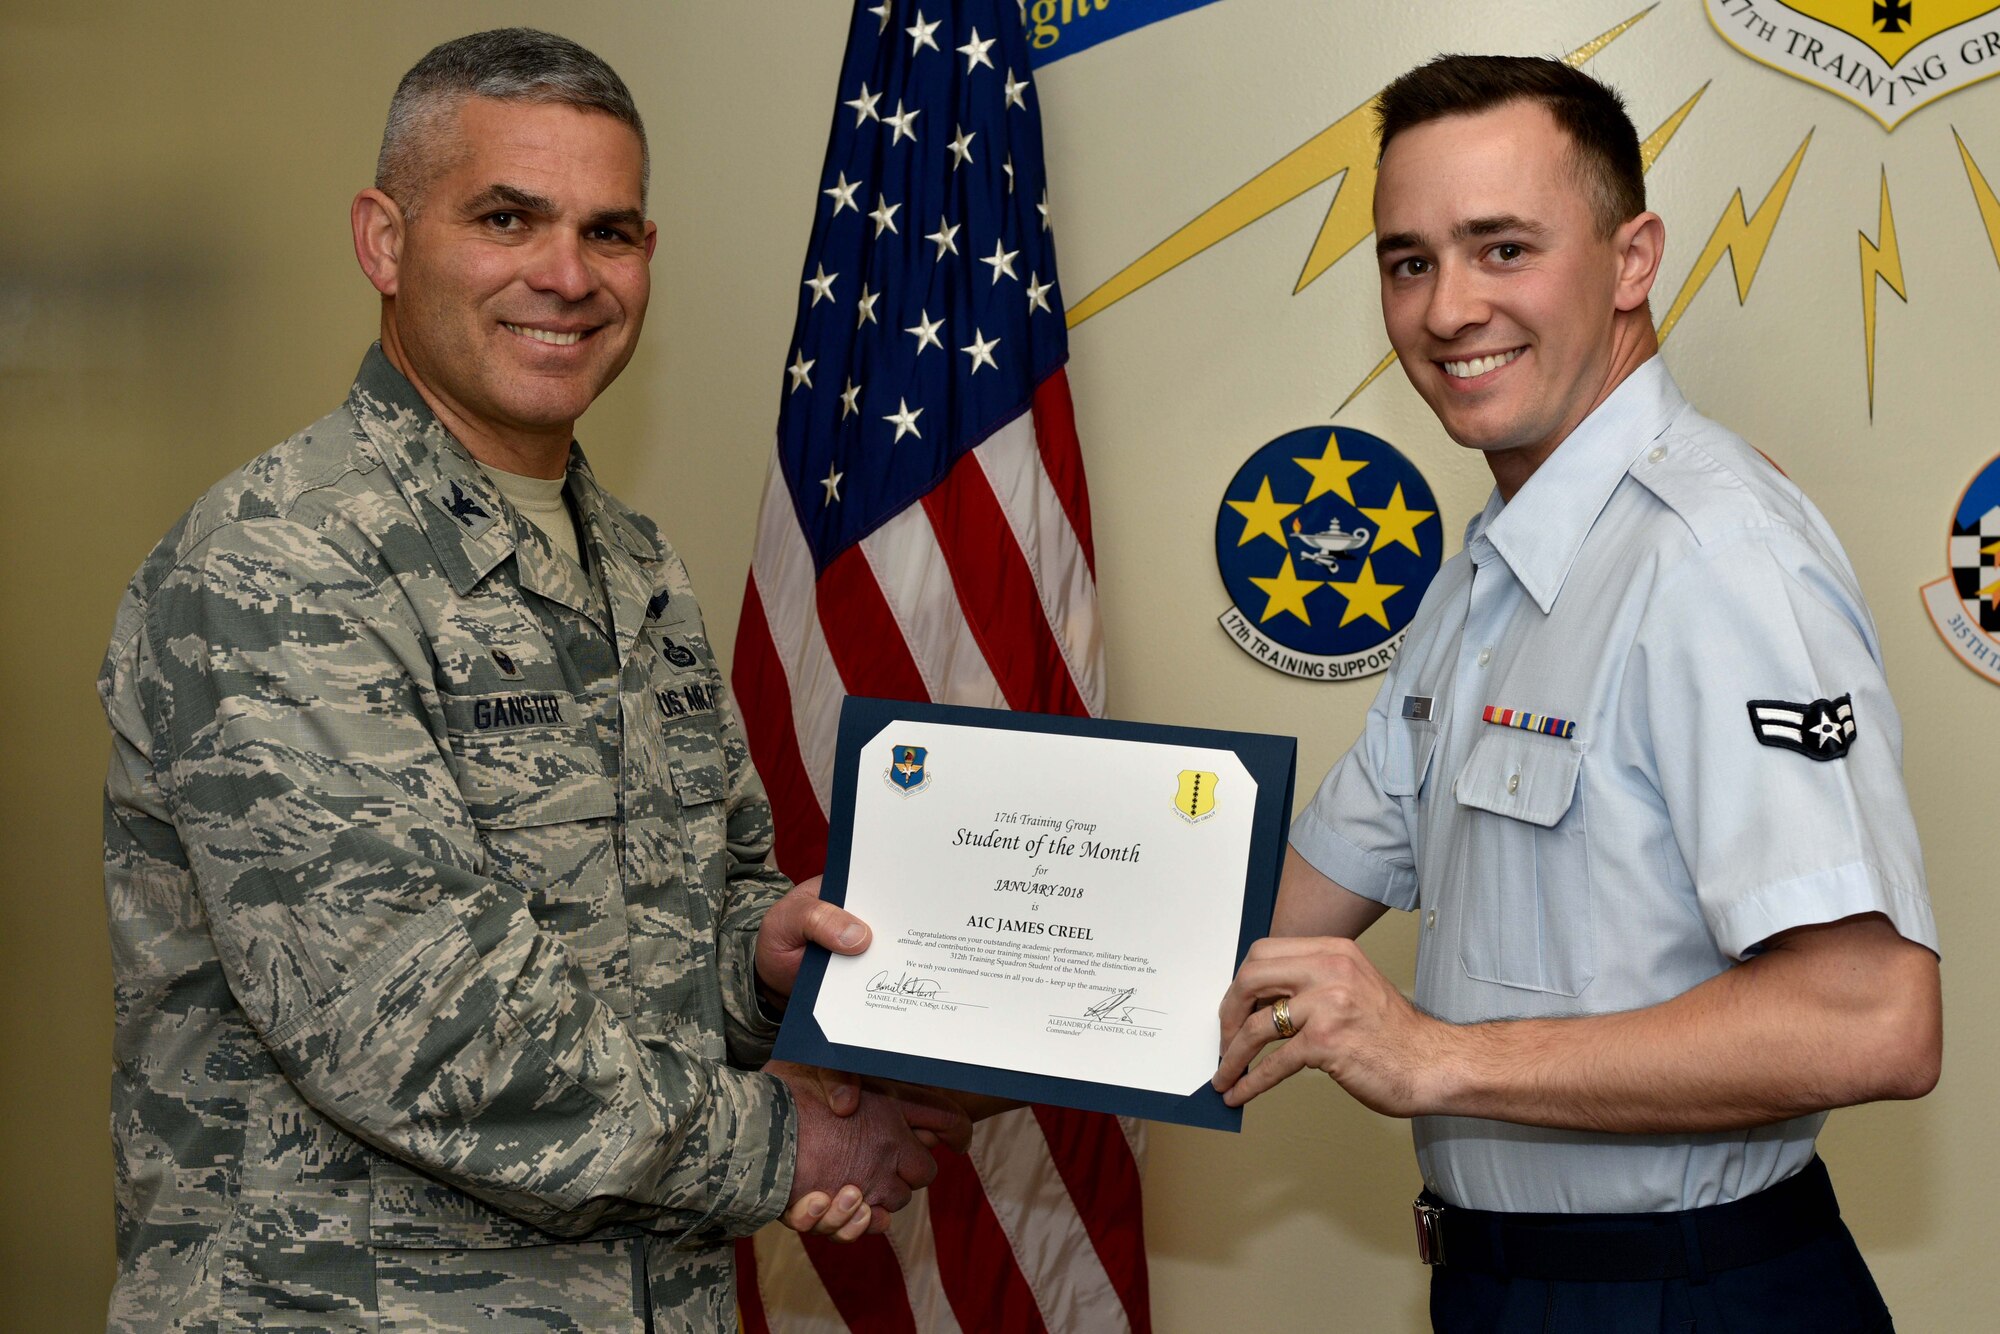 U.S. Air Force Col. Alex Ganster, 17th Training Group commander, presents the 312th Training Squadron Student of the Month award for Jan. 2018 to Airman 1st Class James Creel, 312th TRS trainee, in the Brandenburg Hall on Goodfellow Air Force Base, Texas, Jan. 2, 2018. The 312th TRS’s mission is to provide Department of Defense and international customers with mission ready fire protection and special instruments graduates and provide mission support for the Air Force Technical Applications Center.